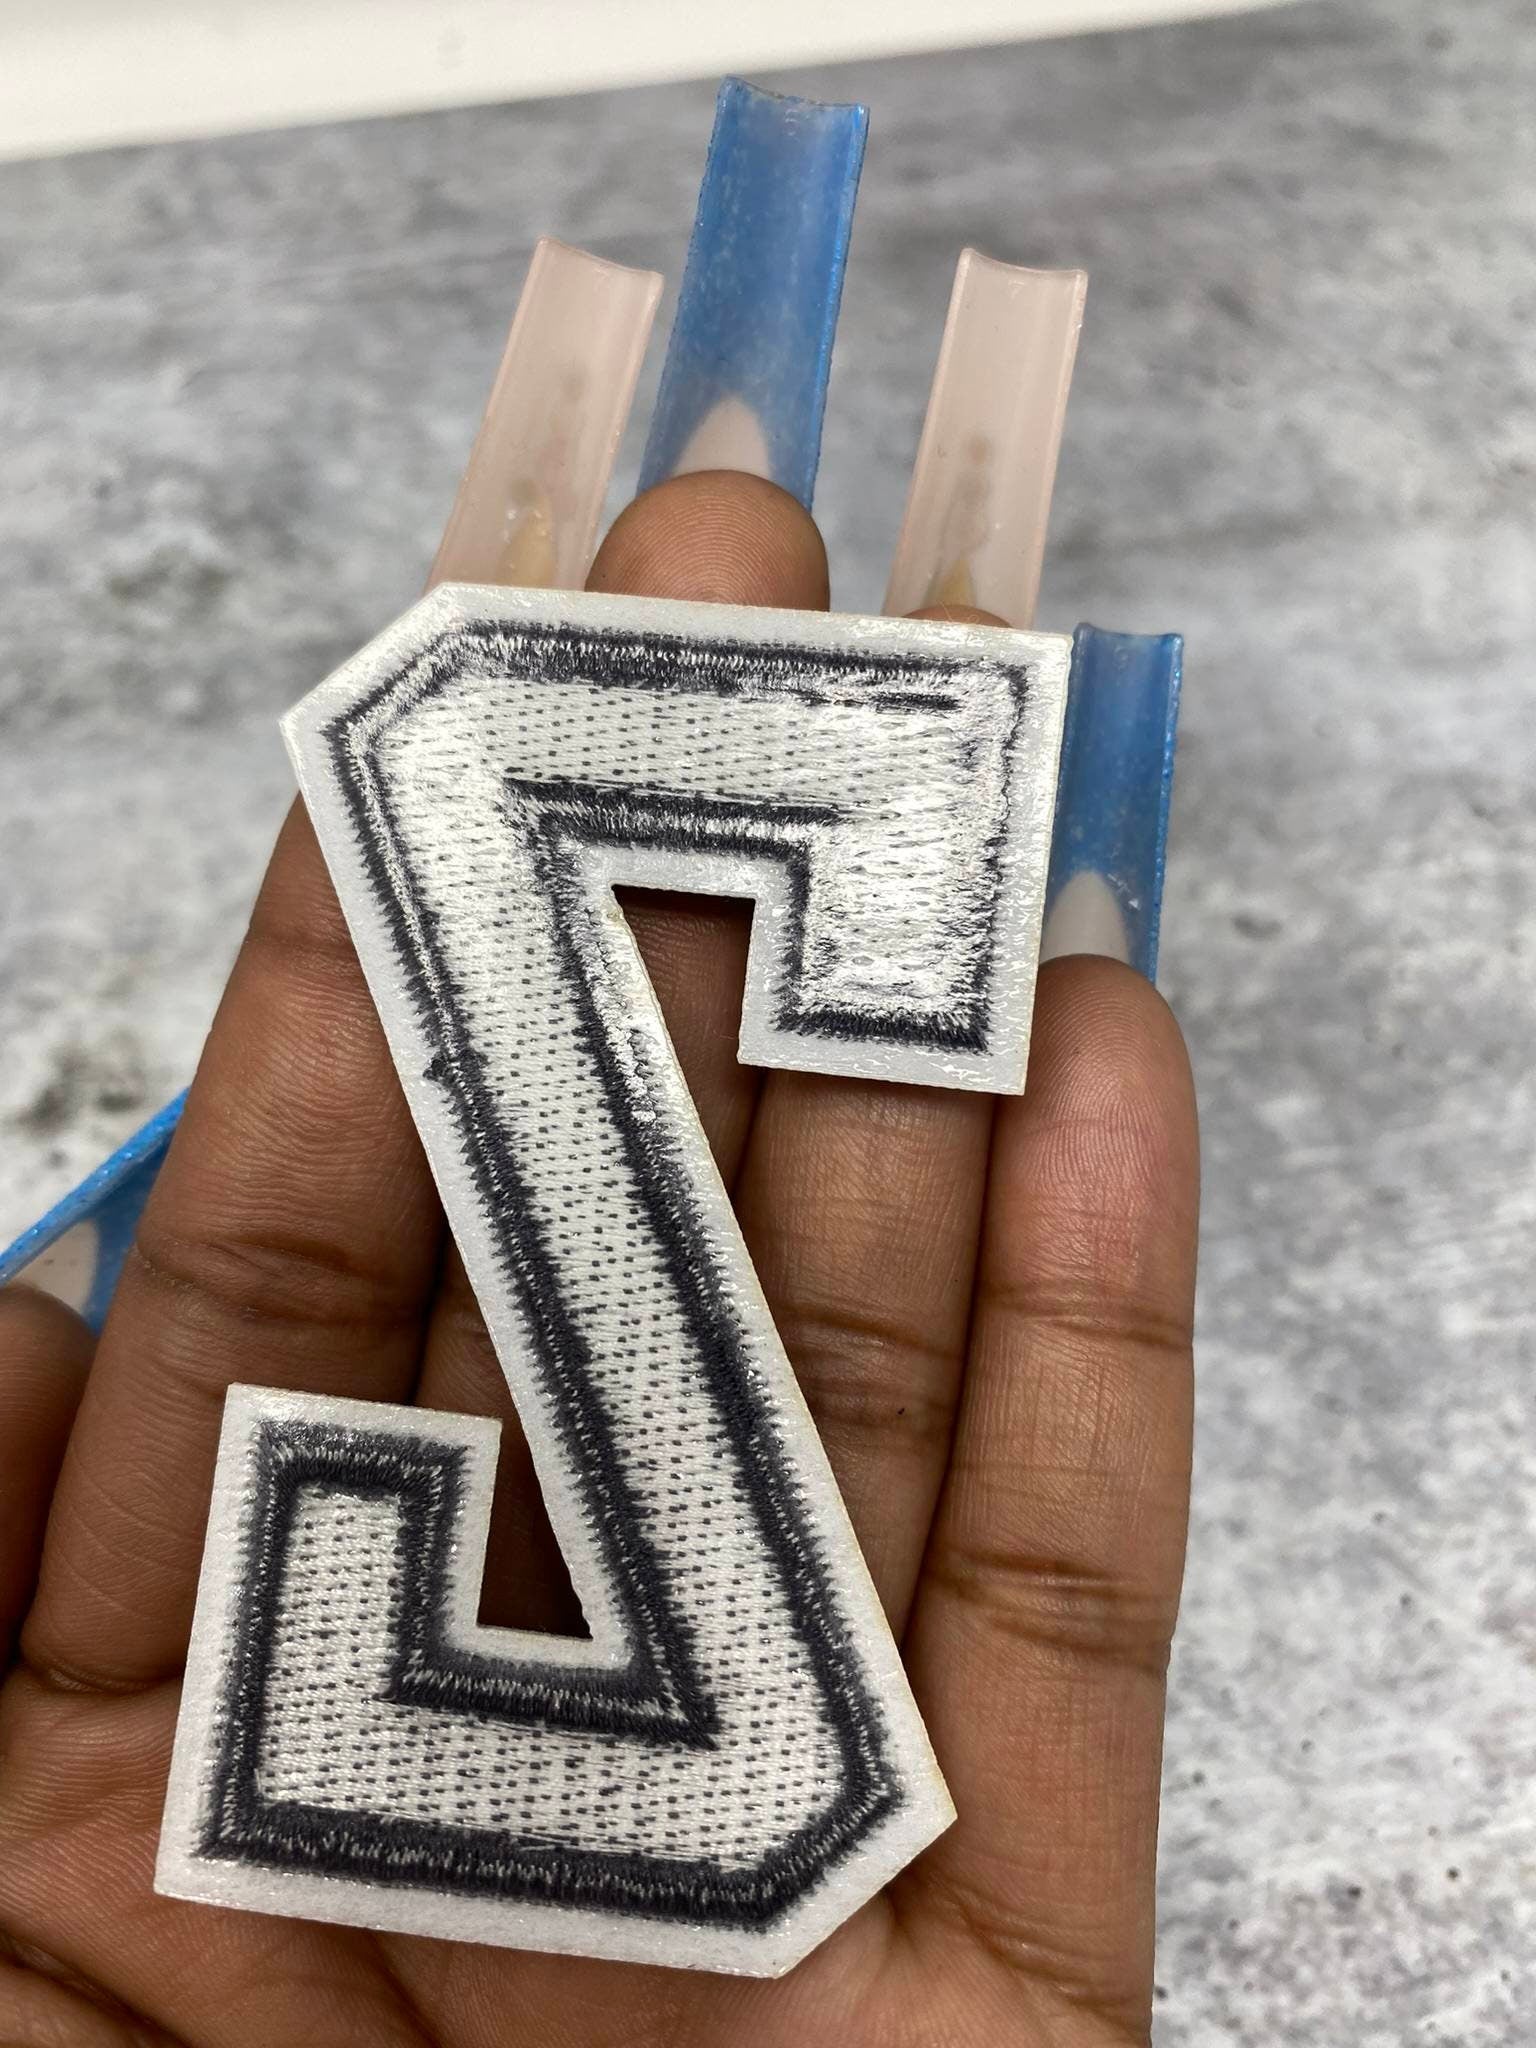 New, "GRAY" 3" Embroidered Letter w/White Felt, Varsity Letter Patch, 1-pc, Iron-on Backing, Choose Your Letter, A-Z Letters, DIY Letters,